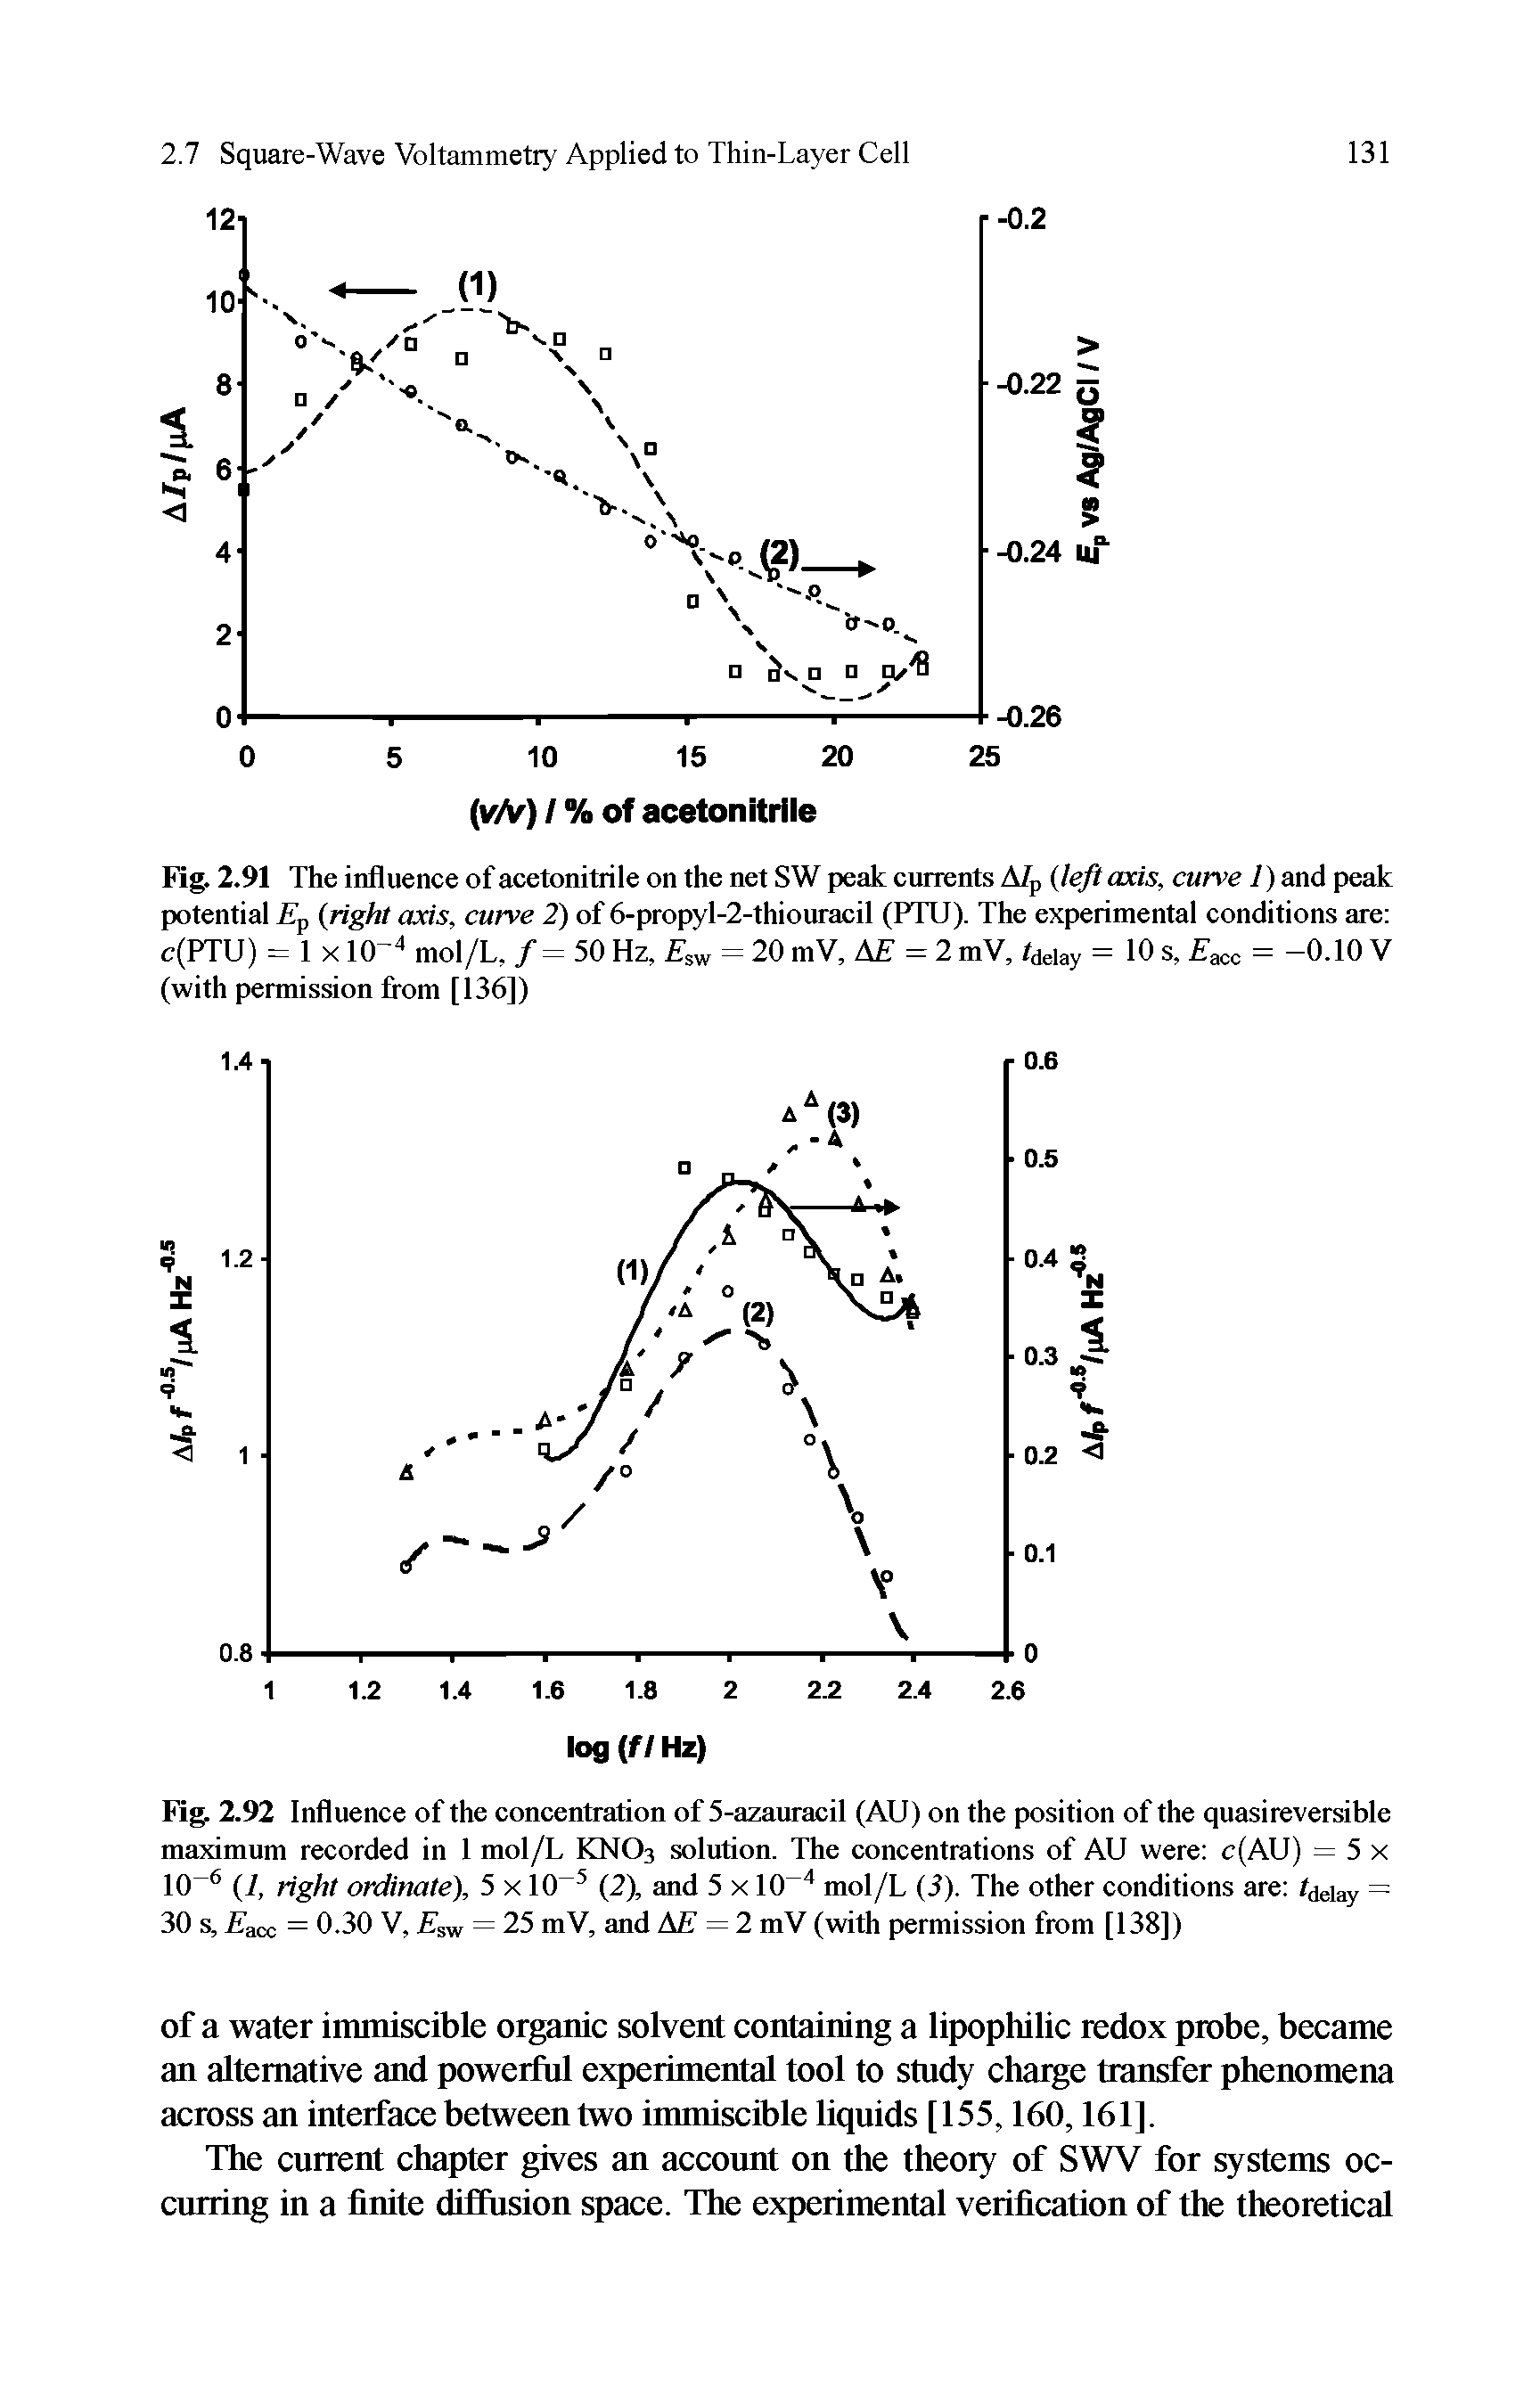 Fig. 2.91 The influence of acetonitrile on the net SW peak currents A/p (left axis, curve 1) and peak potential (right axis, curve 2) of 6-propyl-2-thiouracil (PTU). The experimental conditions are c(PTU) = 1 X mol/L, /= 50 Hz, sw = 20 mV, A = 2 mV, /delay = 10 s, face = -0.10 V (with permission from [136])...